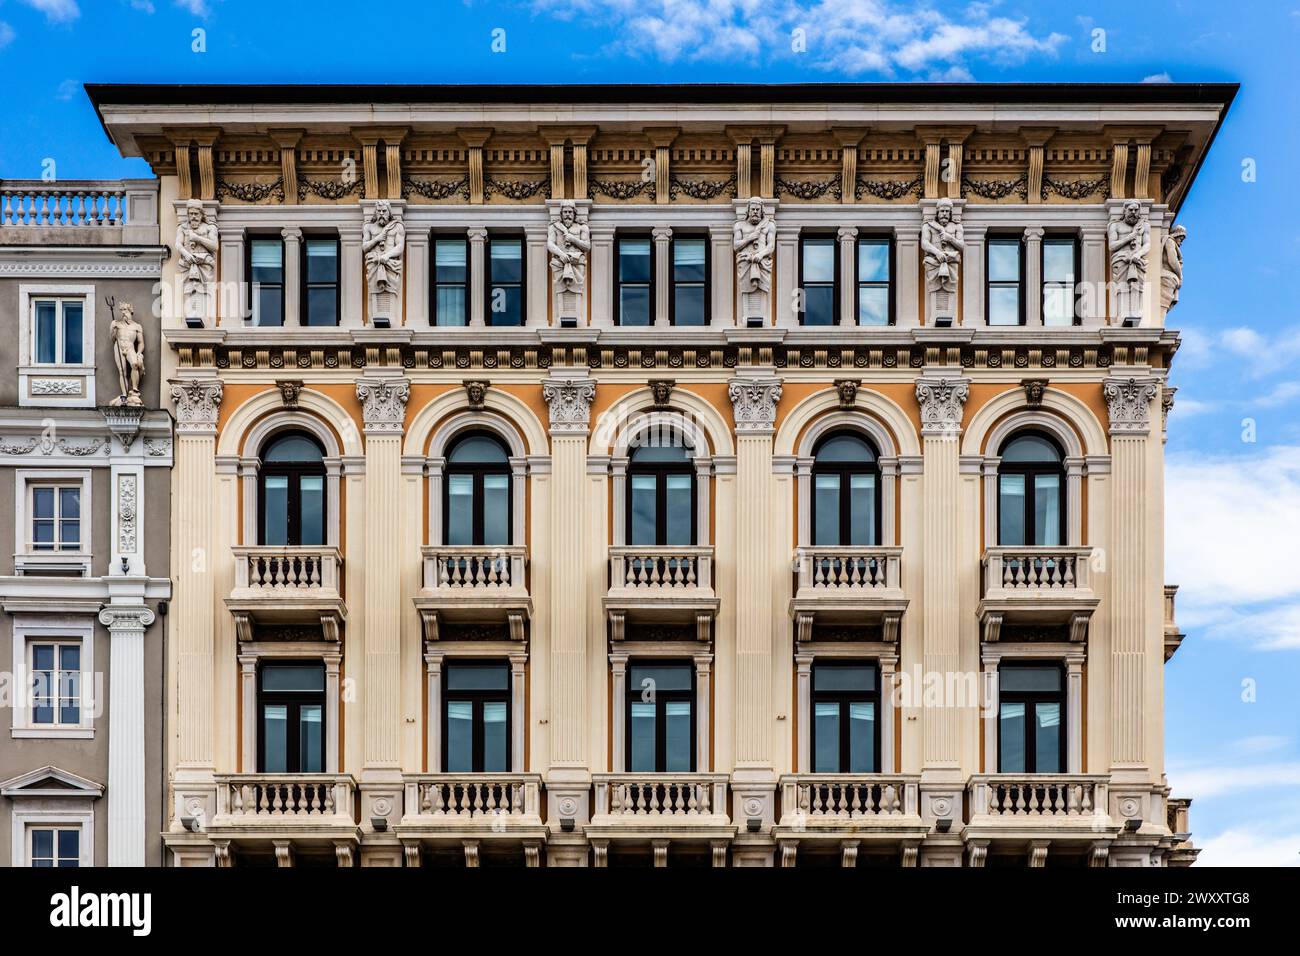 Palazzo Modello, by Giuseppe Bruni, 1873, electic historicism, Piazza Unita d'Italia in the heart of the city, is surrounded on three sides by Stock Photo